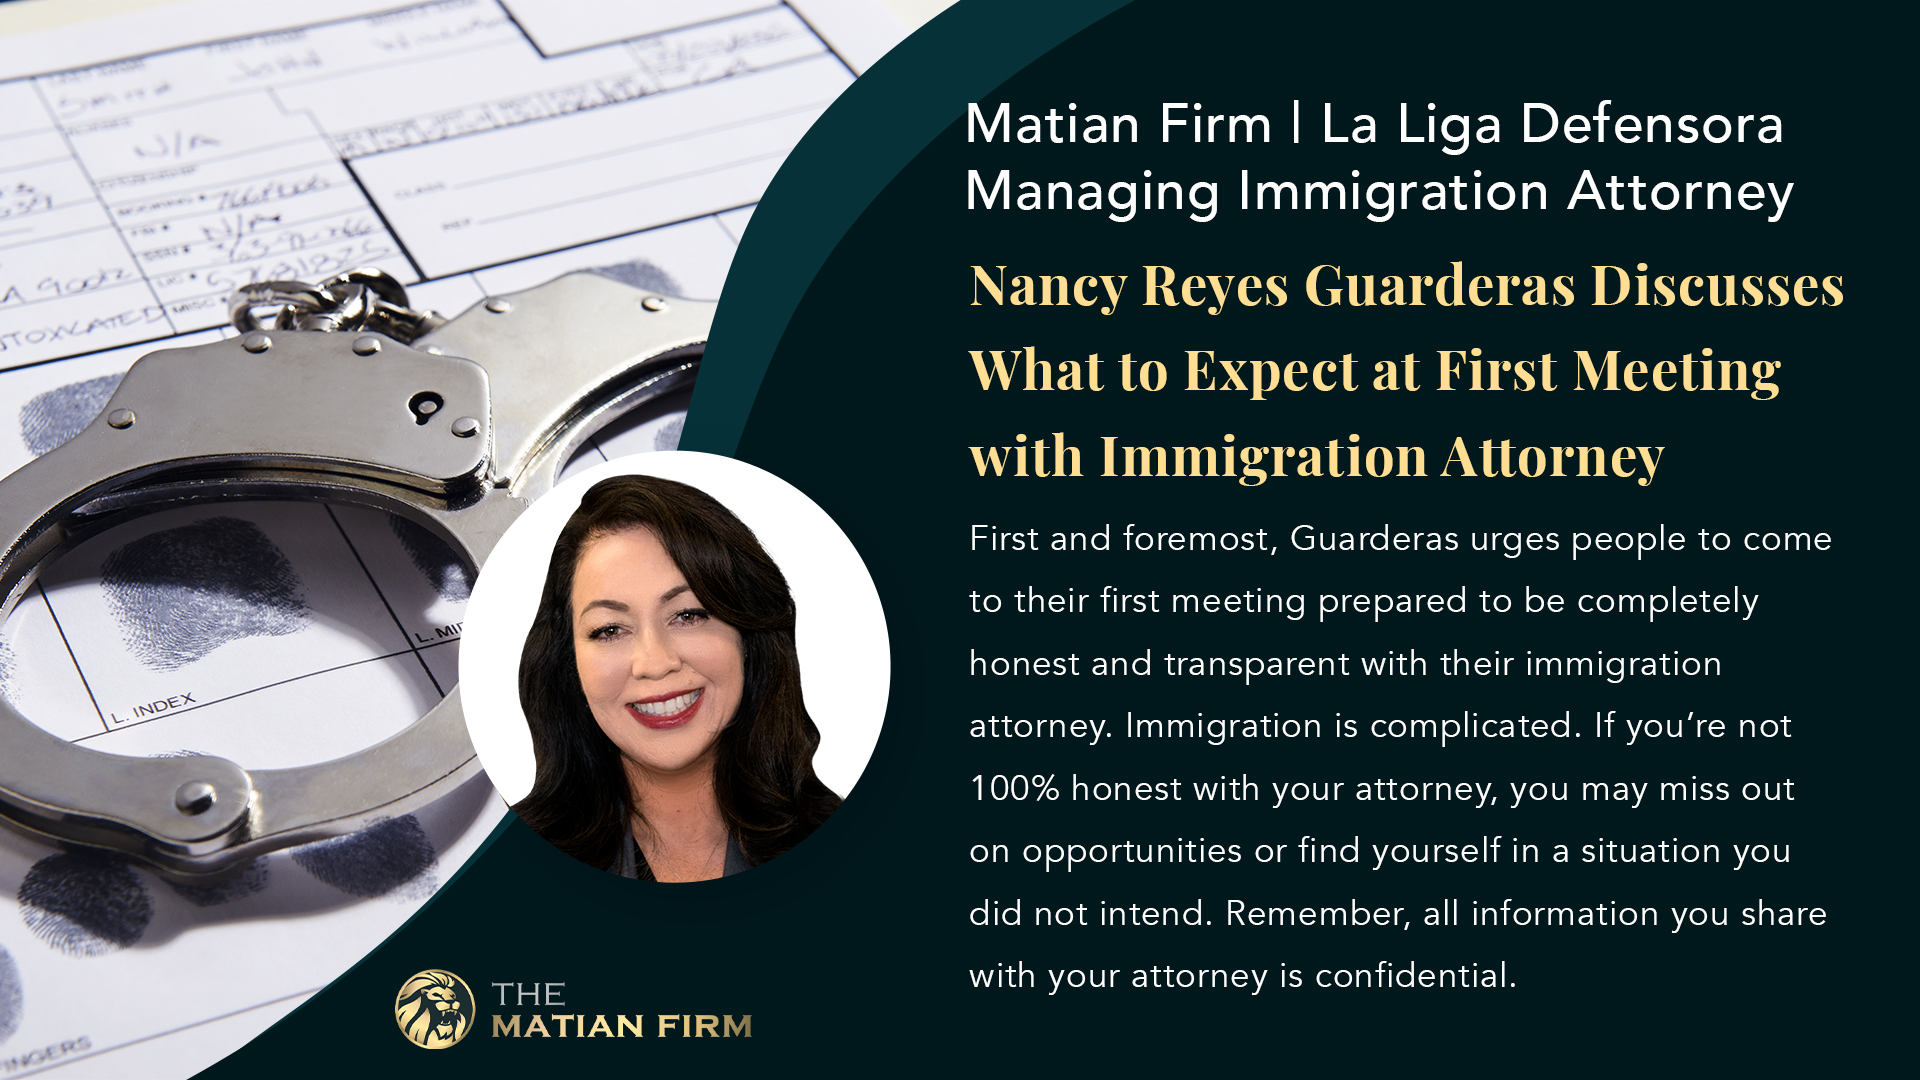 Matian Firm |  La Liga Defensora Managing Immigration Attorney Nancy Reyes Guarderas discusses ways immigrants can prevent a criminal past from affecting their immigration status